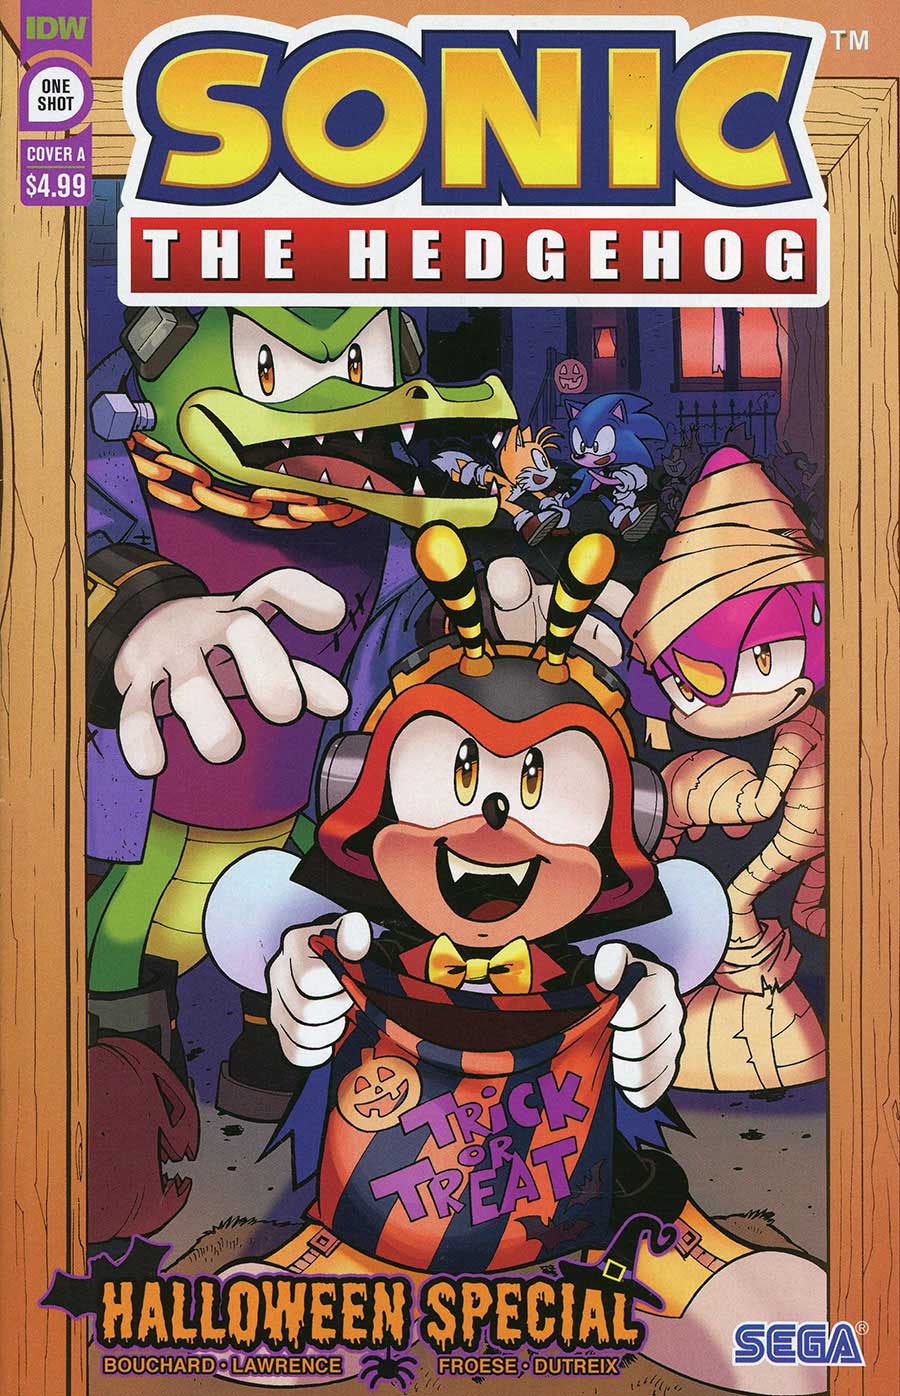 Sonic The Hedgehog Halloween Special #1 (One Shot) Cover A Regular Jack Lawrence Cover